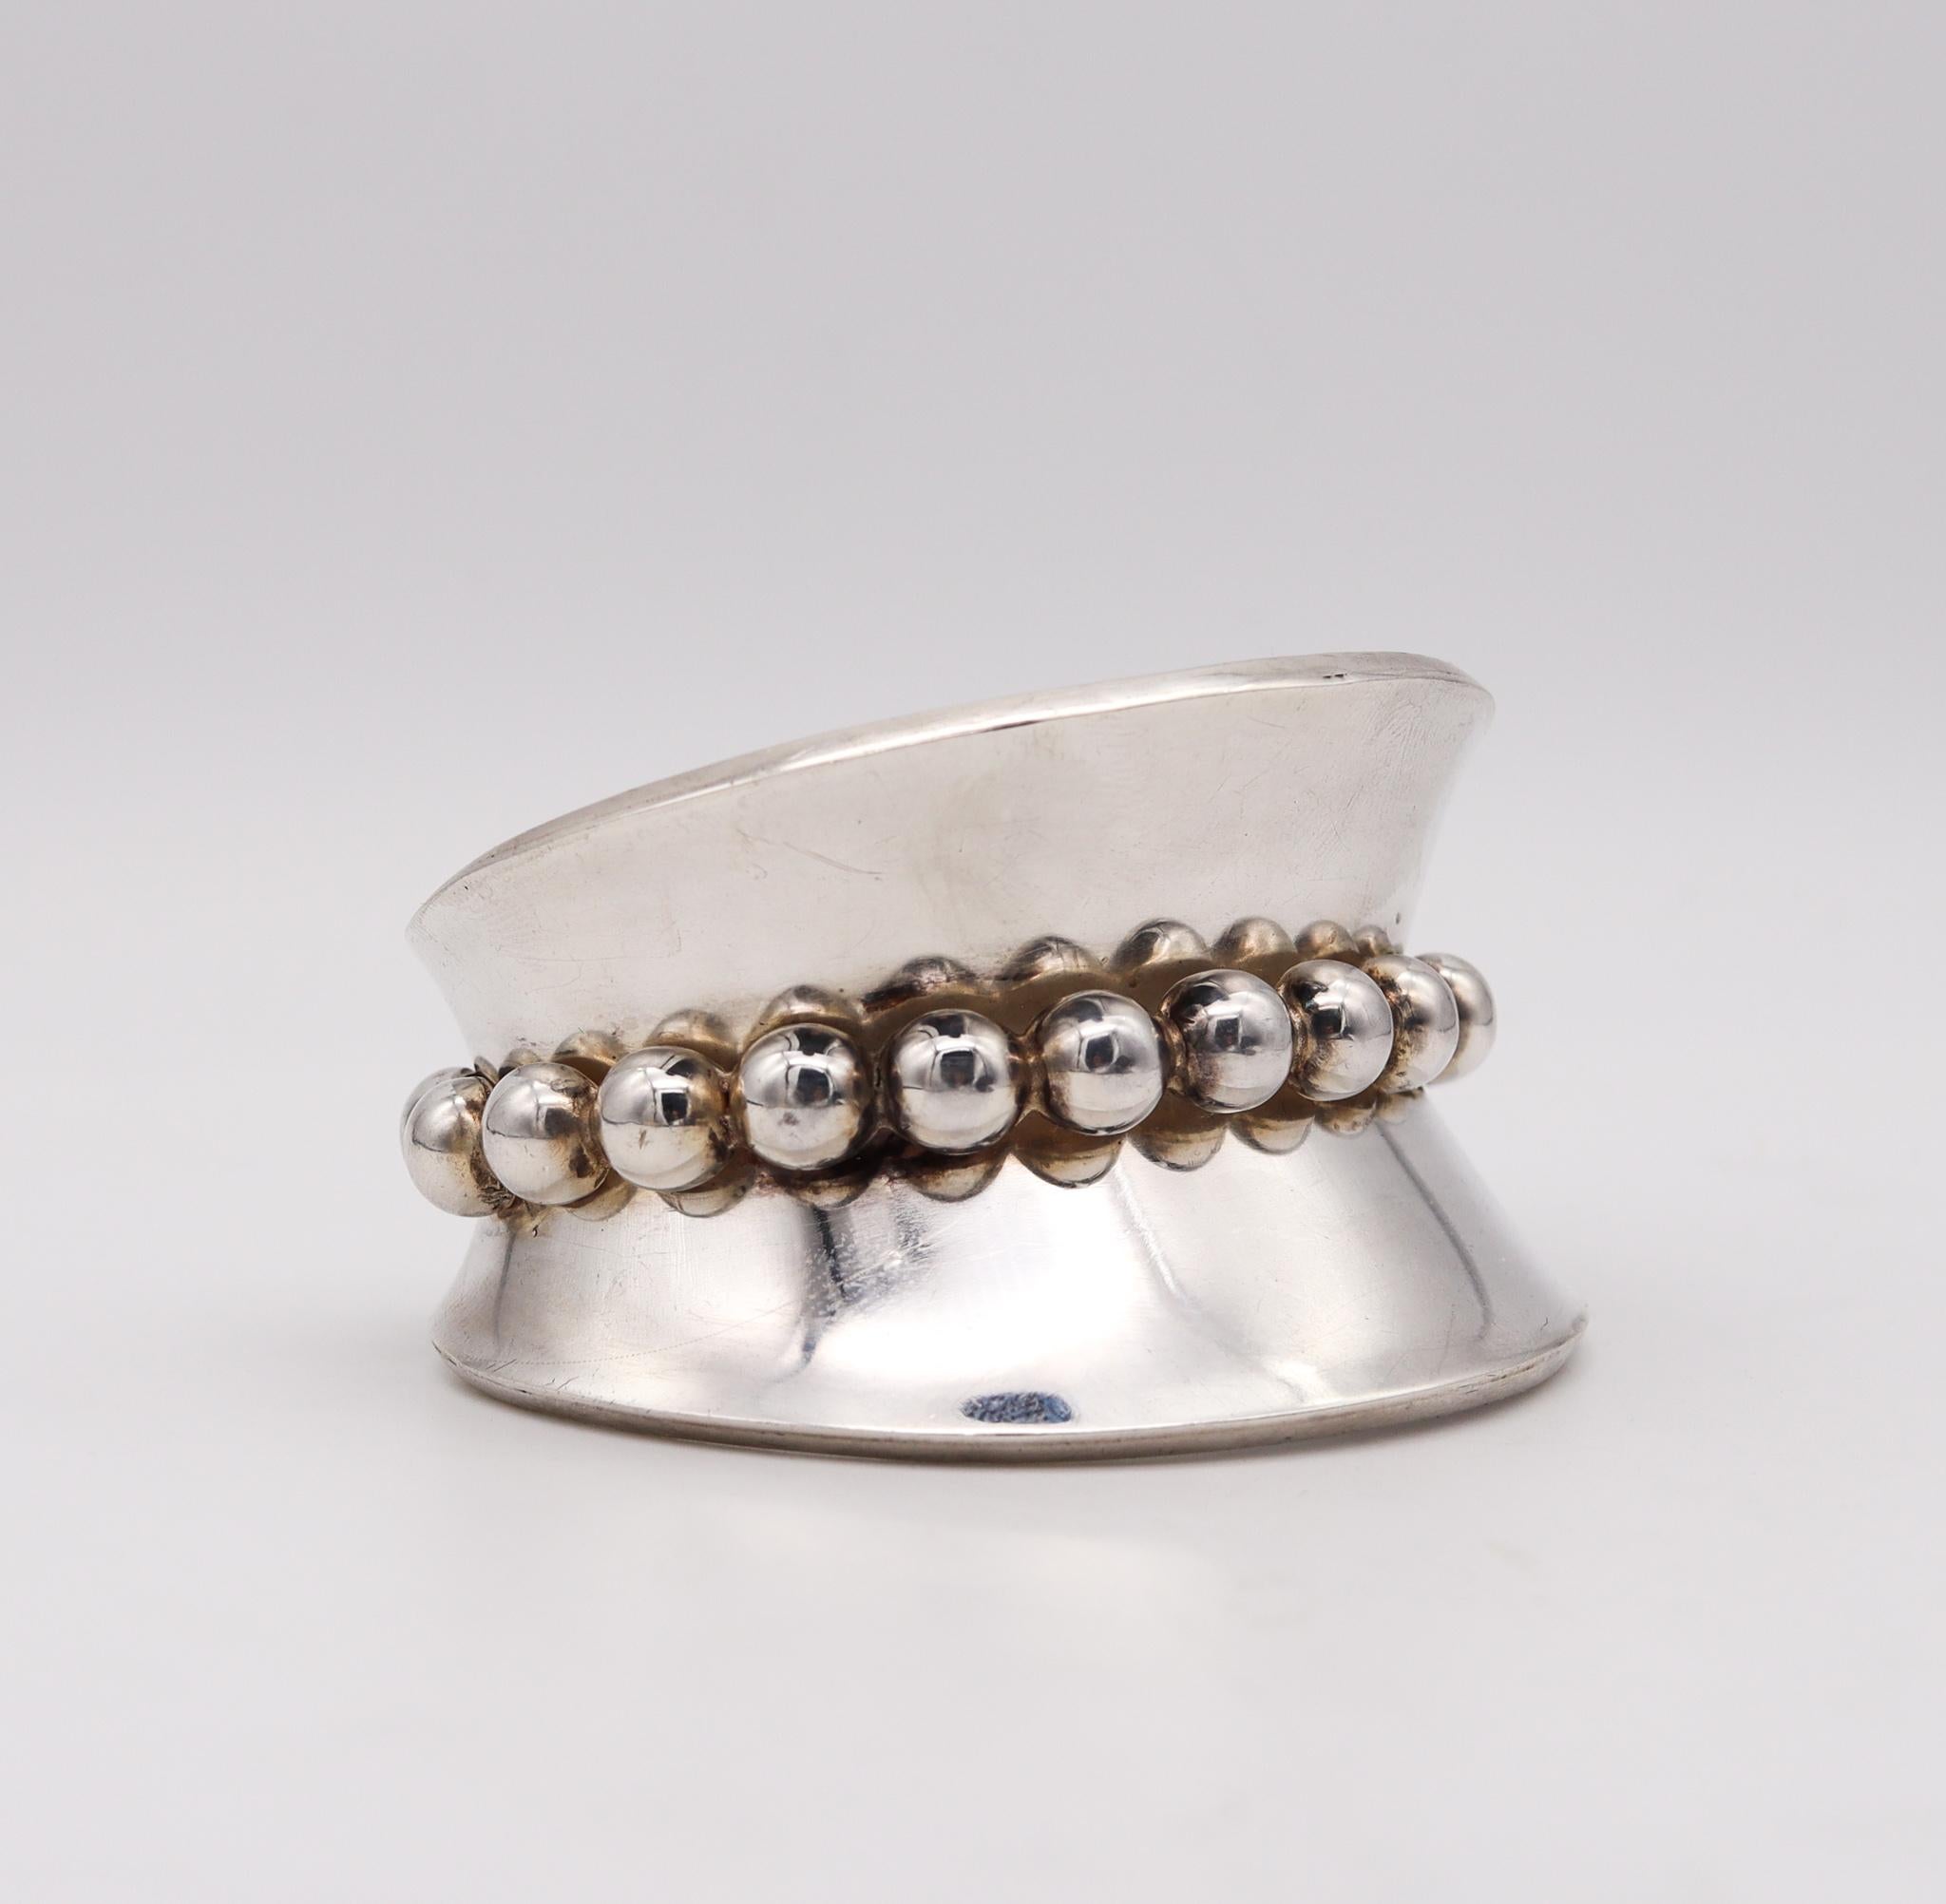 Mexico 1960 Taxco Geometric Statement Cuff Bracelet In Solid 925 Sterling Silver In Excellent Condition For Sale In Miami, FL